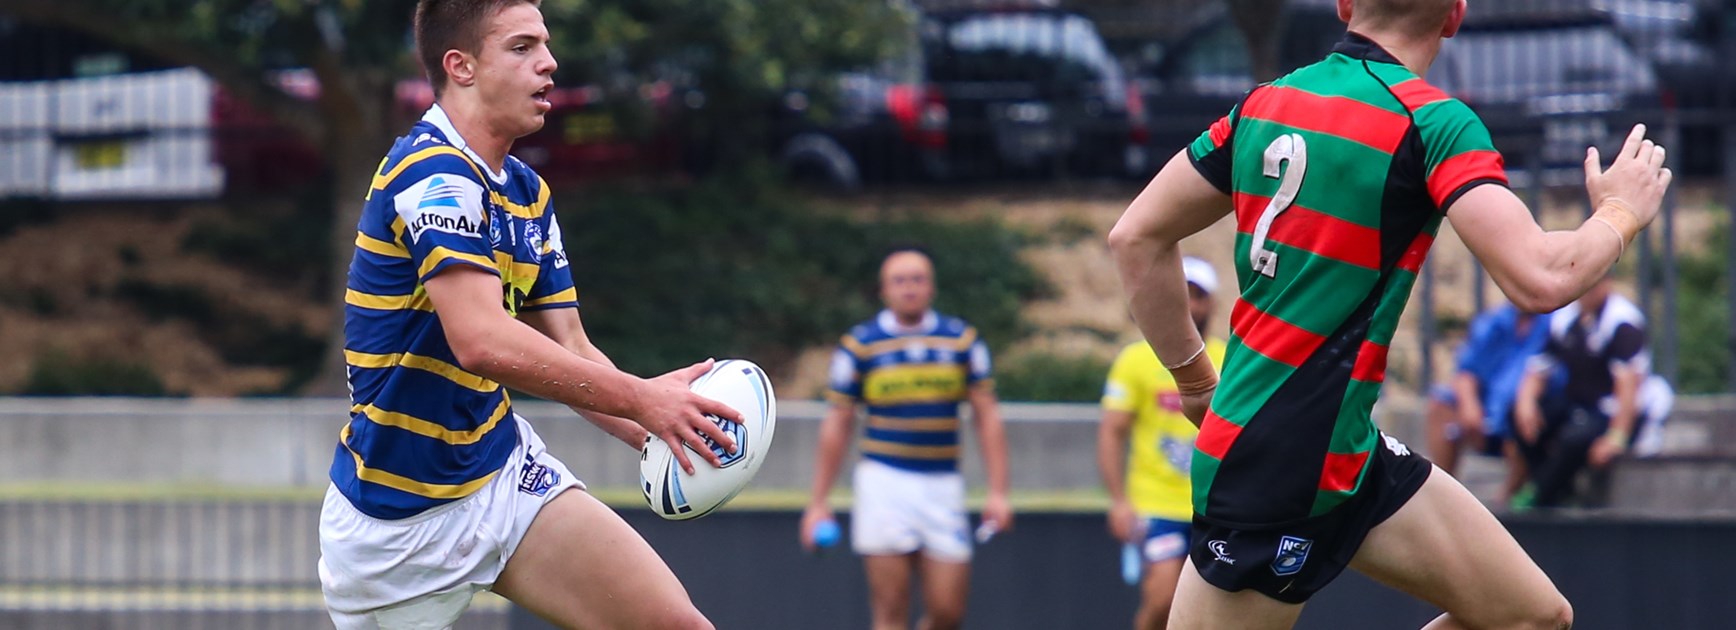 Junior Rep Teams Selected - NSWRL Rd 6 and CRL Rd 5